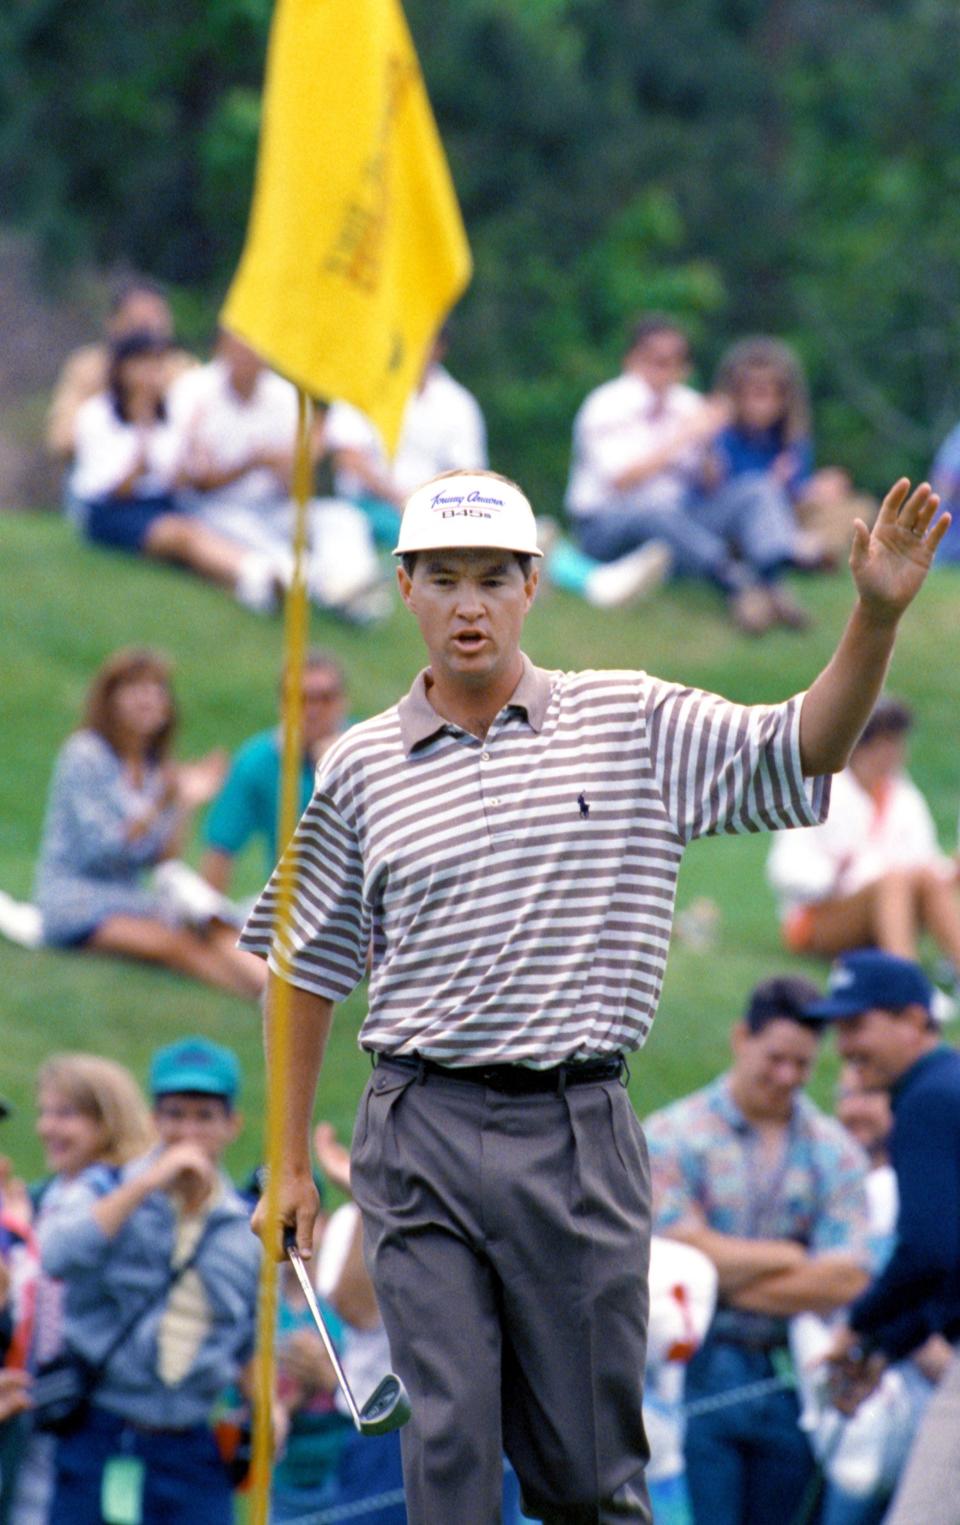 Davis Love III waves to fans as he walks to the pin after chipping his ball from the gallery behind the eighth green into the hole for birdie and the lead during the final round of the 1992 Players Championship. He went on to win by four shots. [Bob Self/Florida Times-Union]